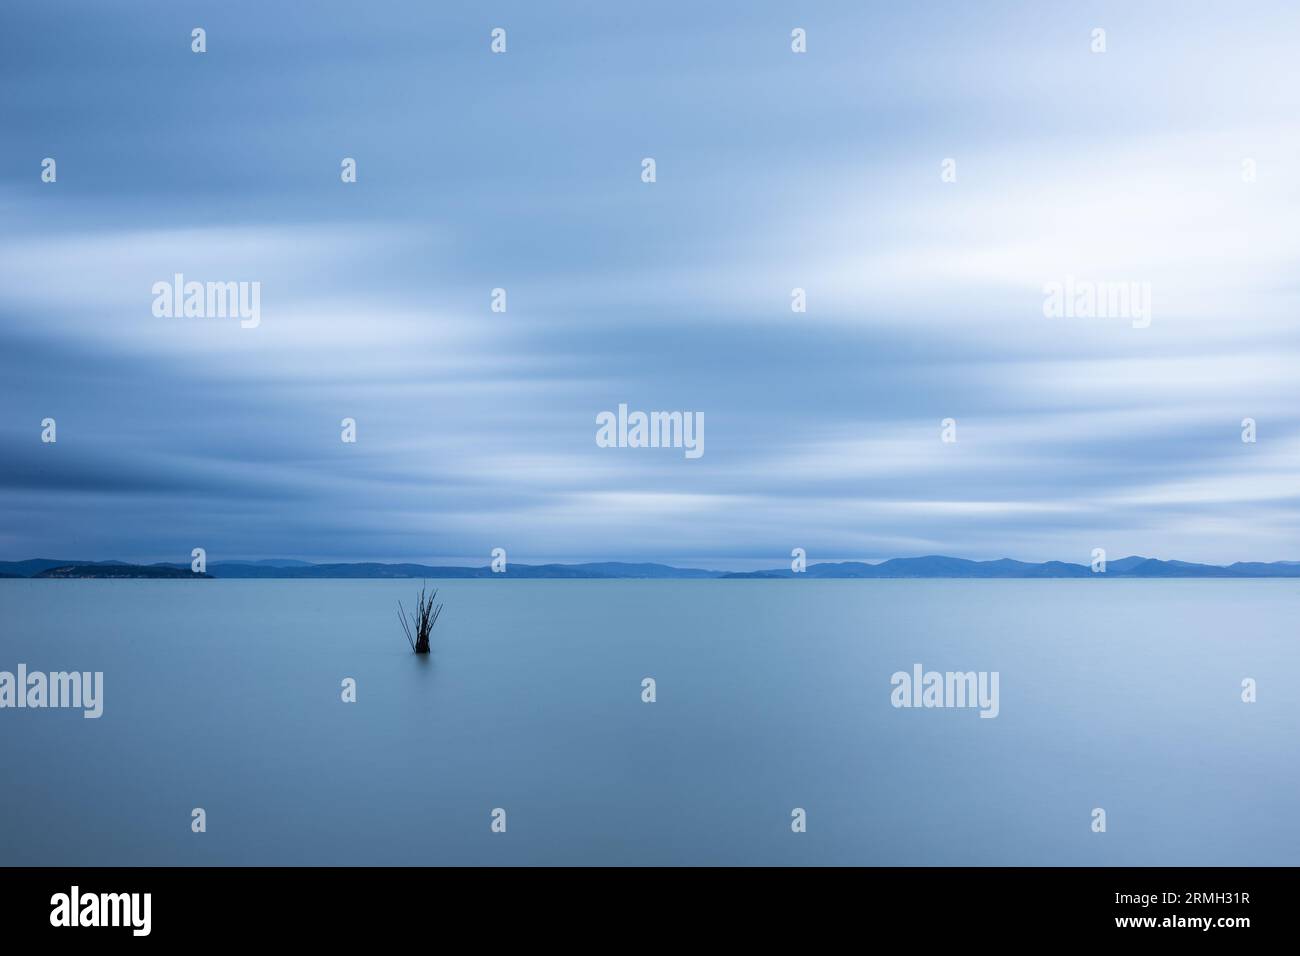 Minimalist view of fishing net poles on a lake, with perfectly still water  and empty sky at dusk Stock Photo - Alamy